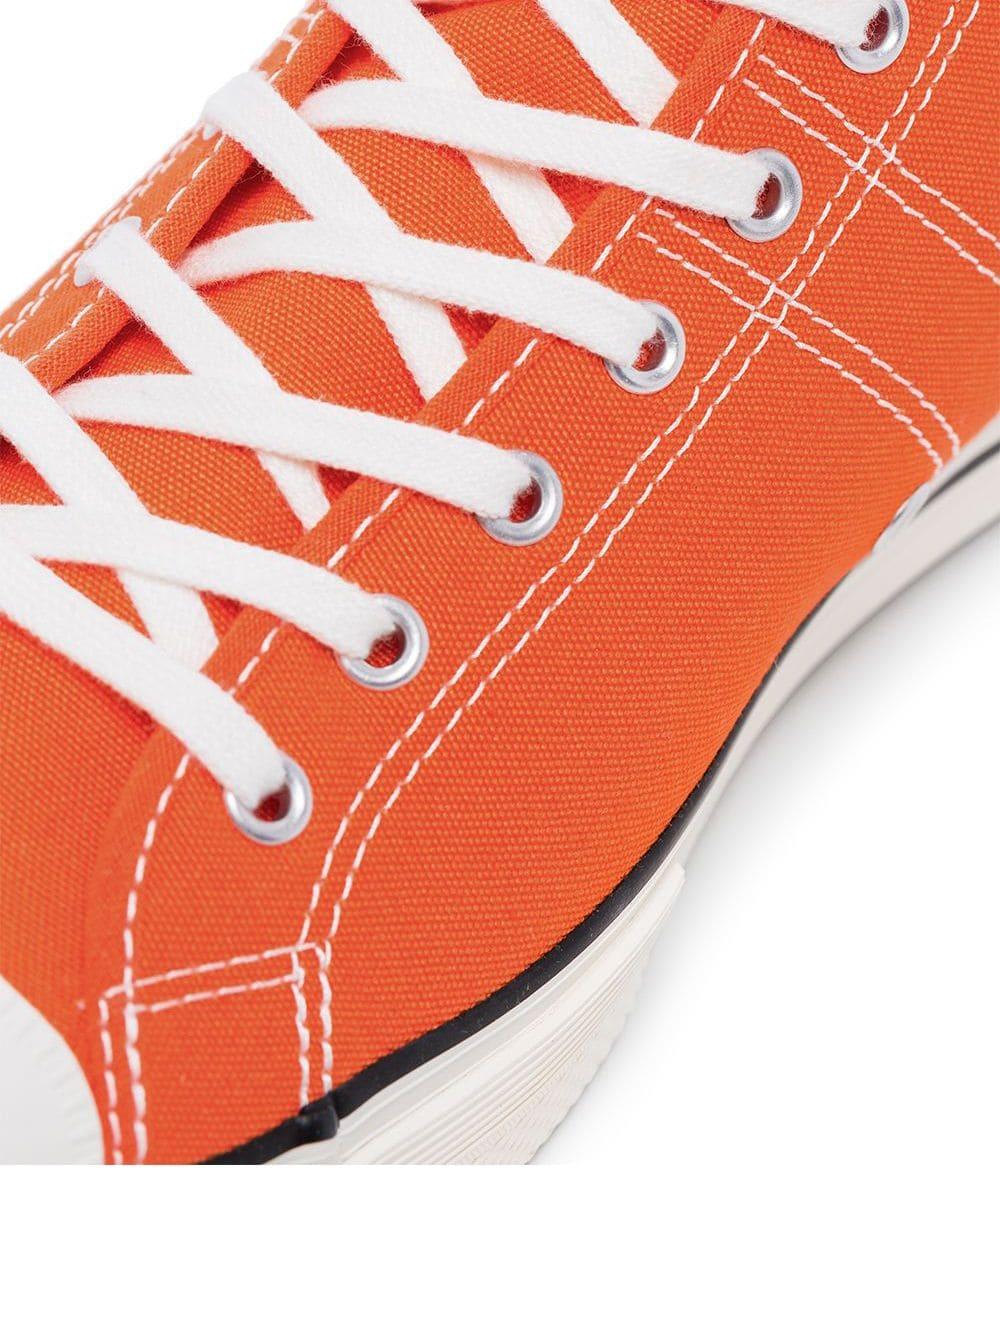 Converse Lucky Star High-top Sneakers in Orange for Men | Lyst